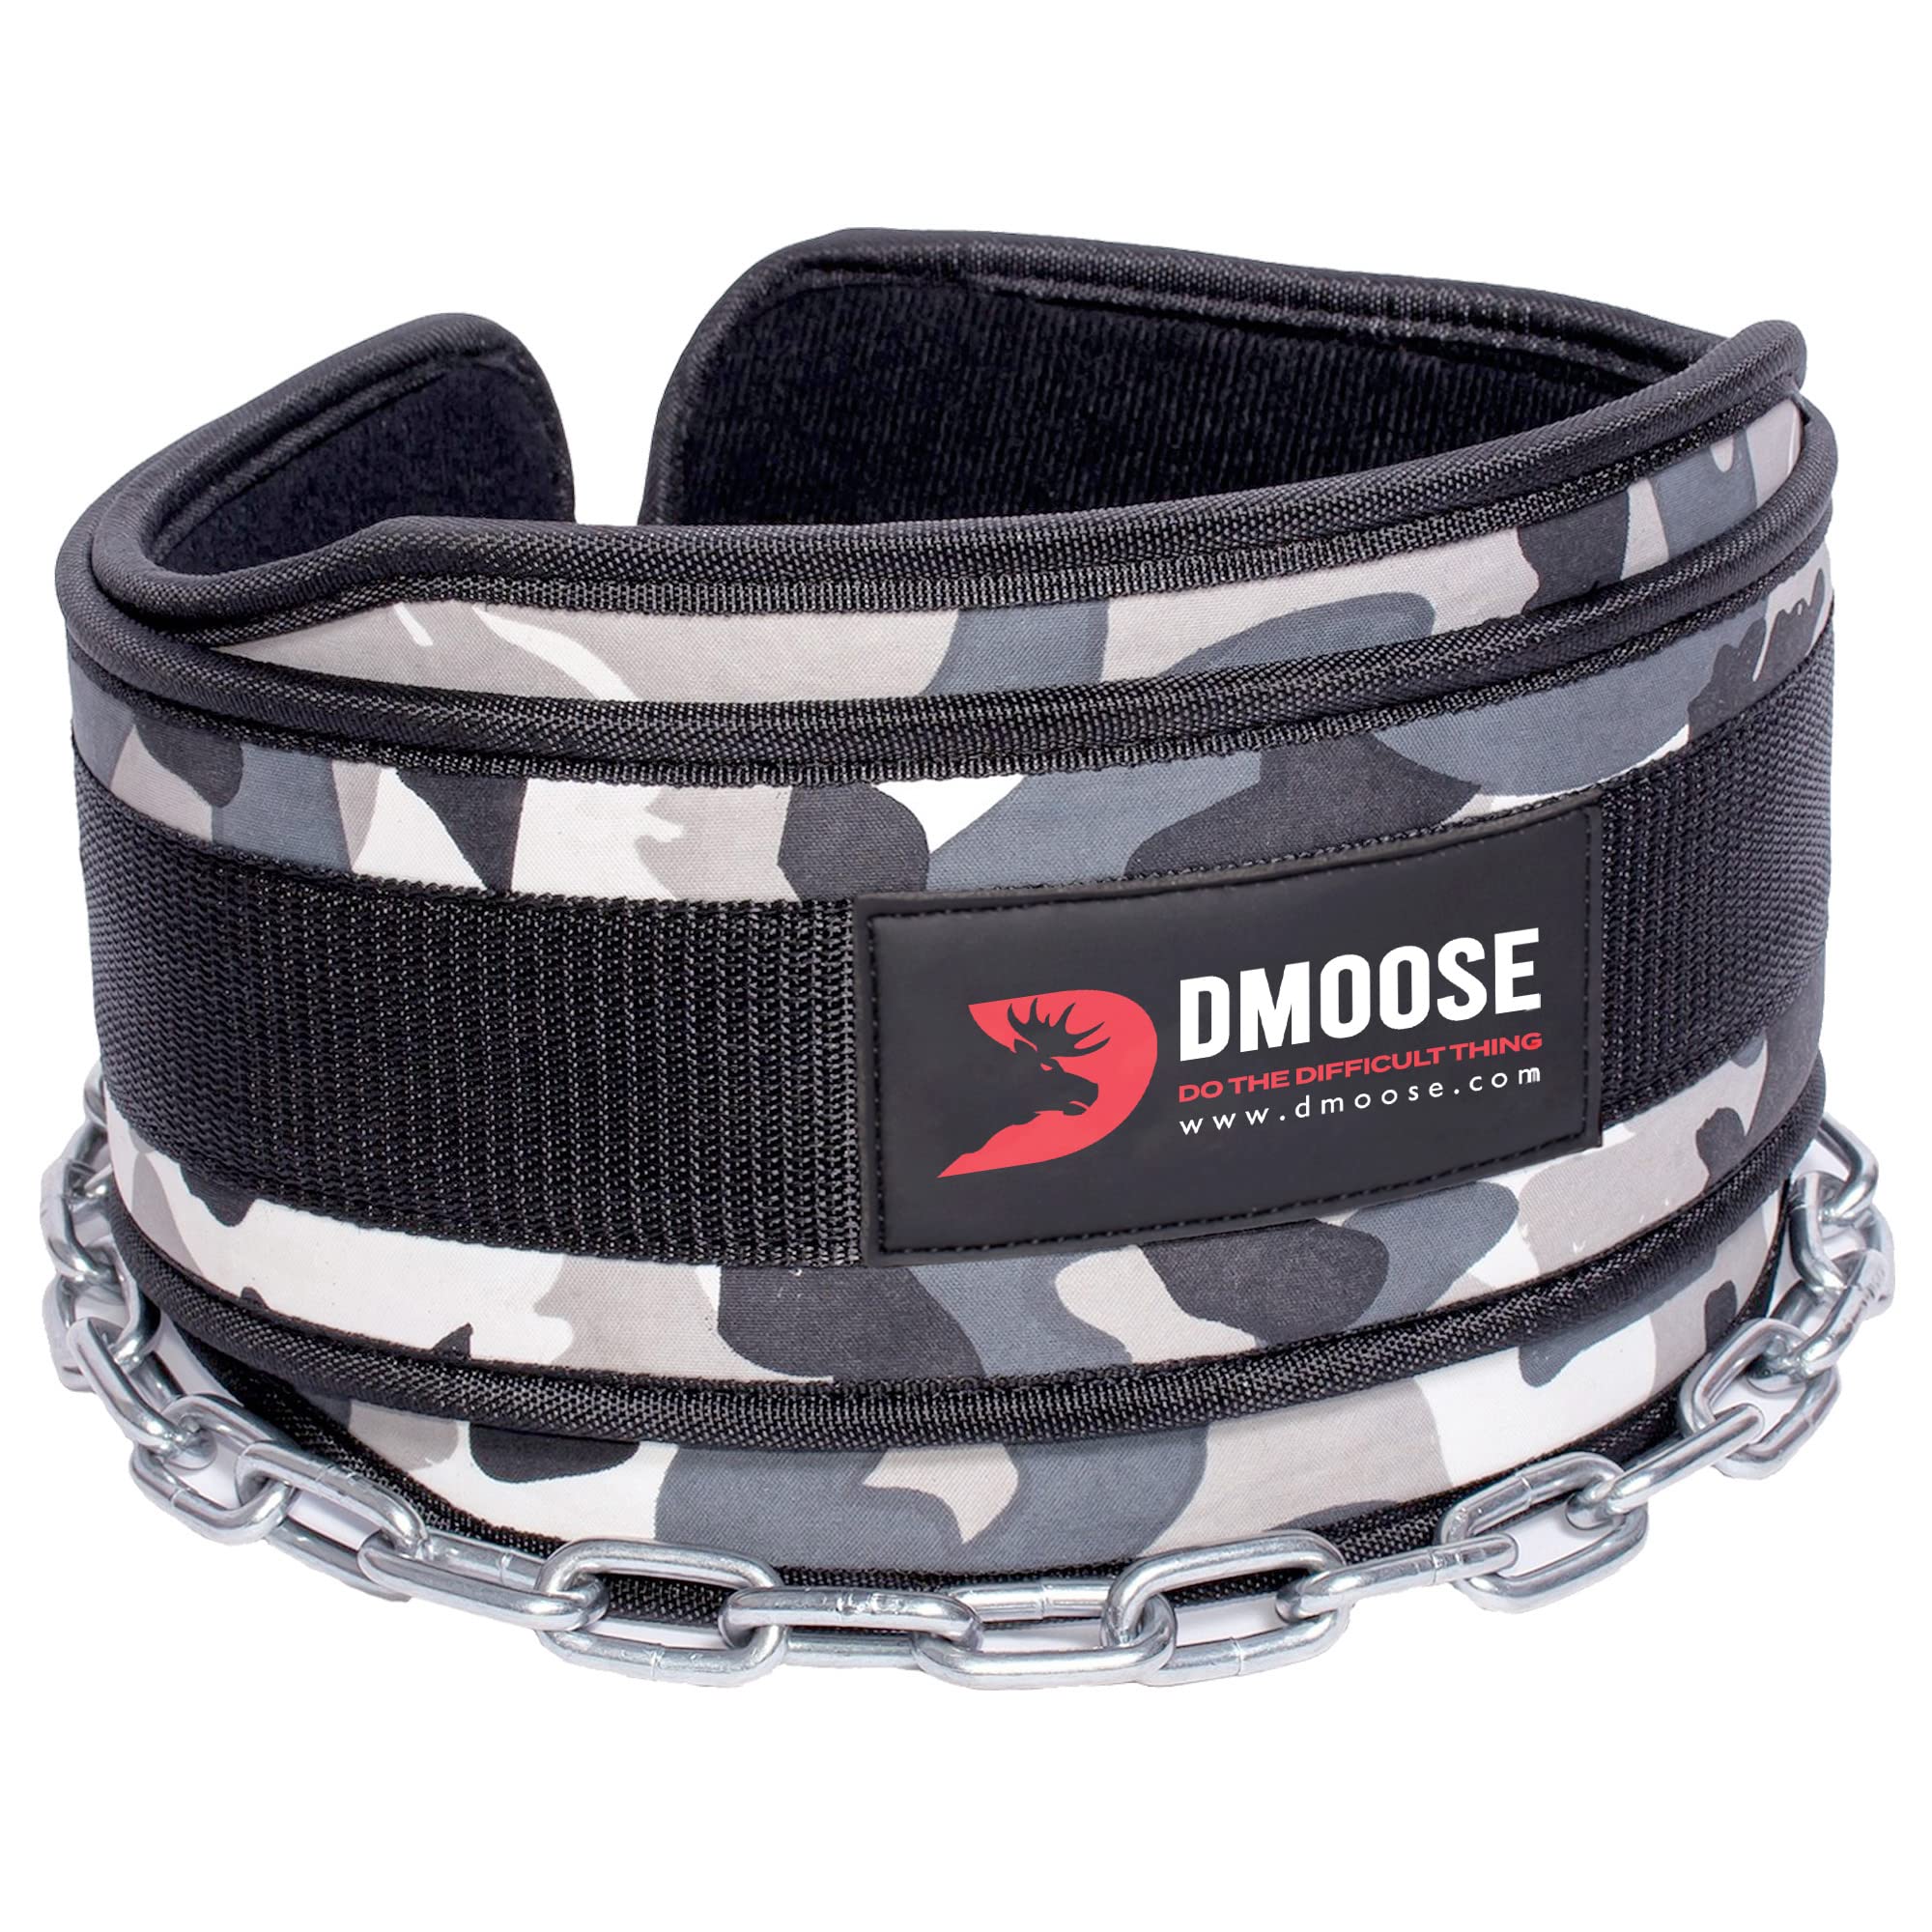 DMoose Fitness Dip Belt with Chain for Weightlifting, Pullups, Powerlifting and Bodybuilding, Gray Camo - image 1 of 6